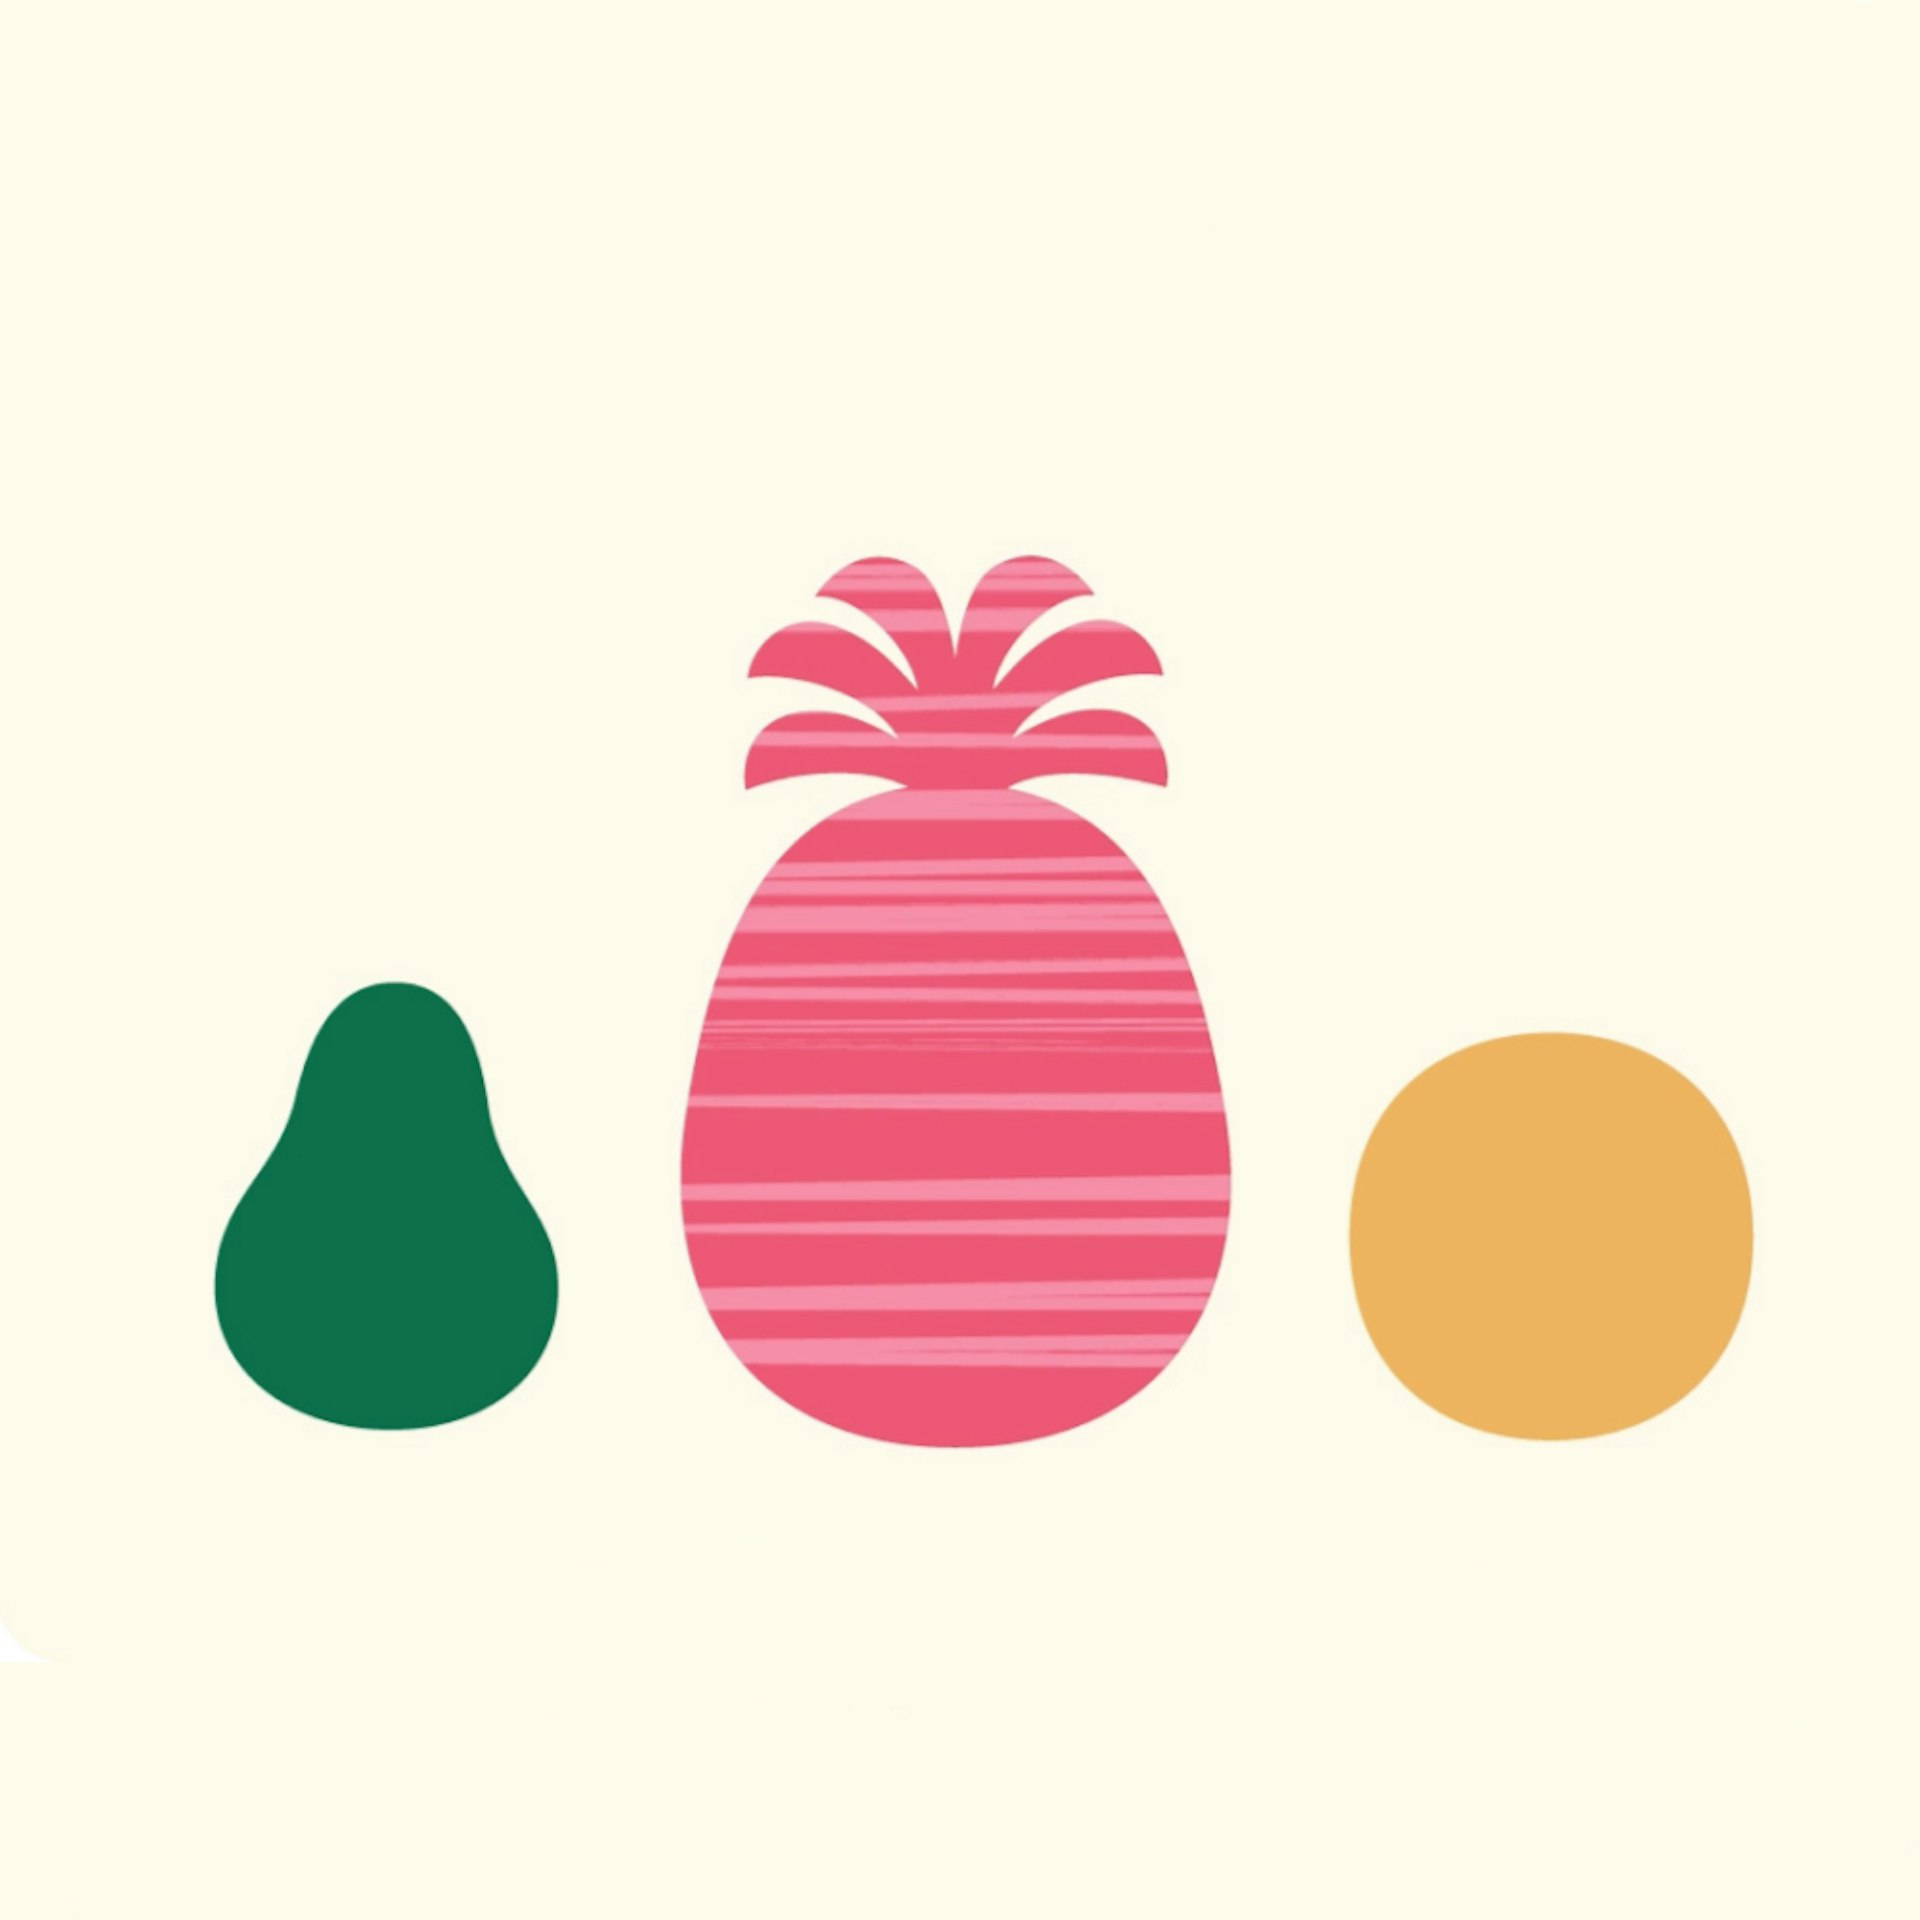 Colourful illustrated fruit on a beige background.